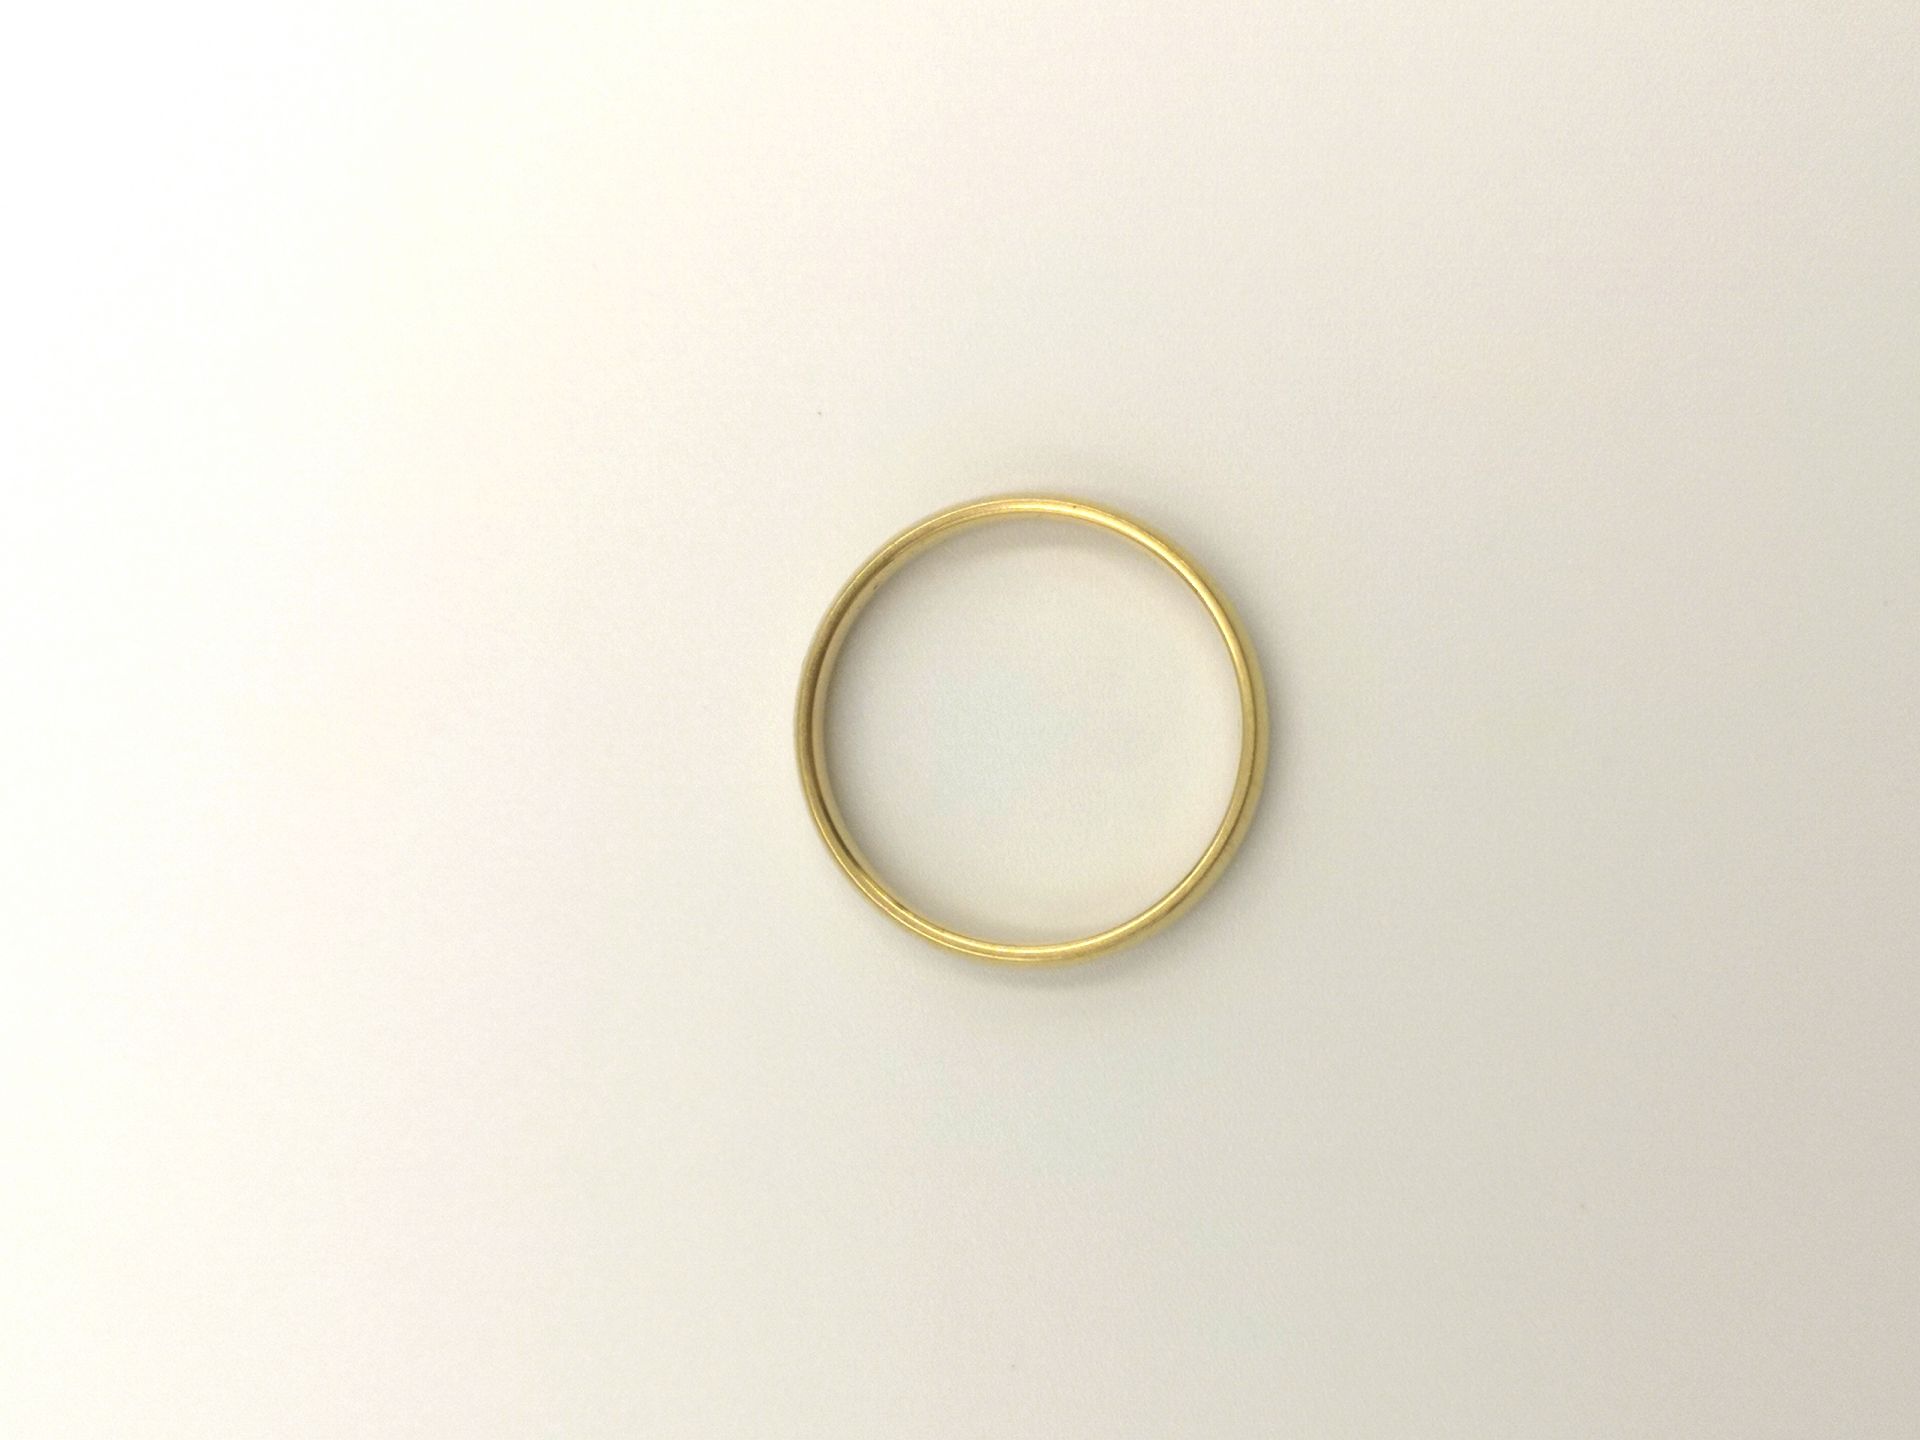 18ct gold band - Image 3 of 3